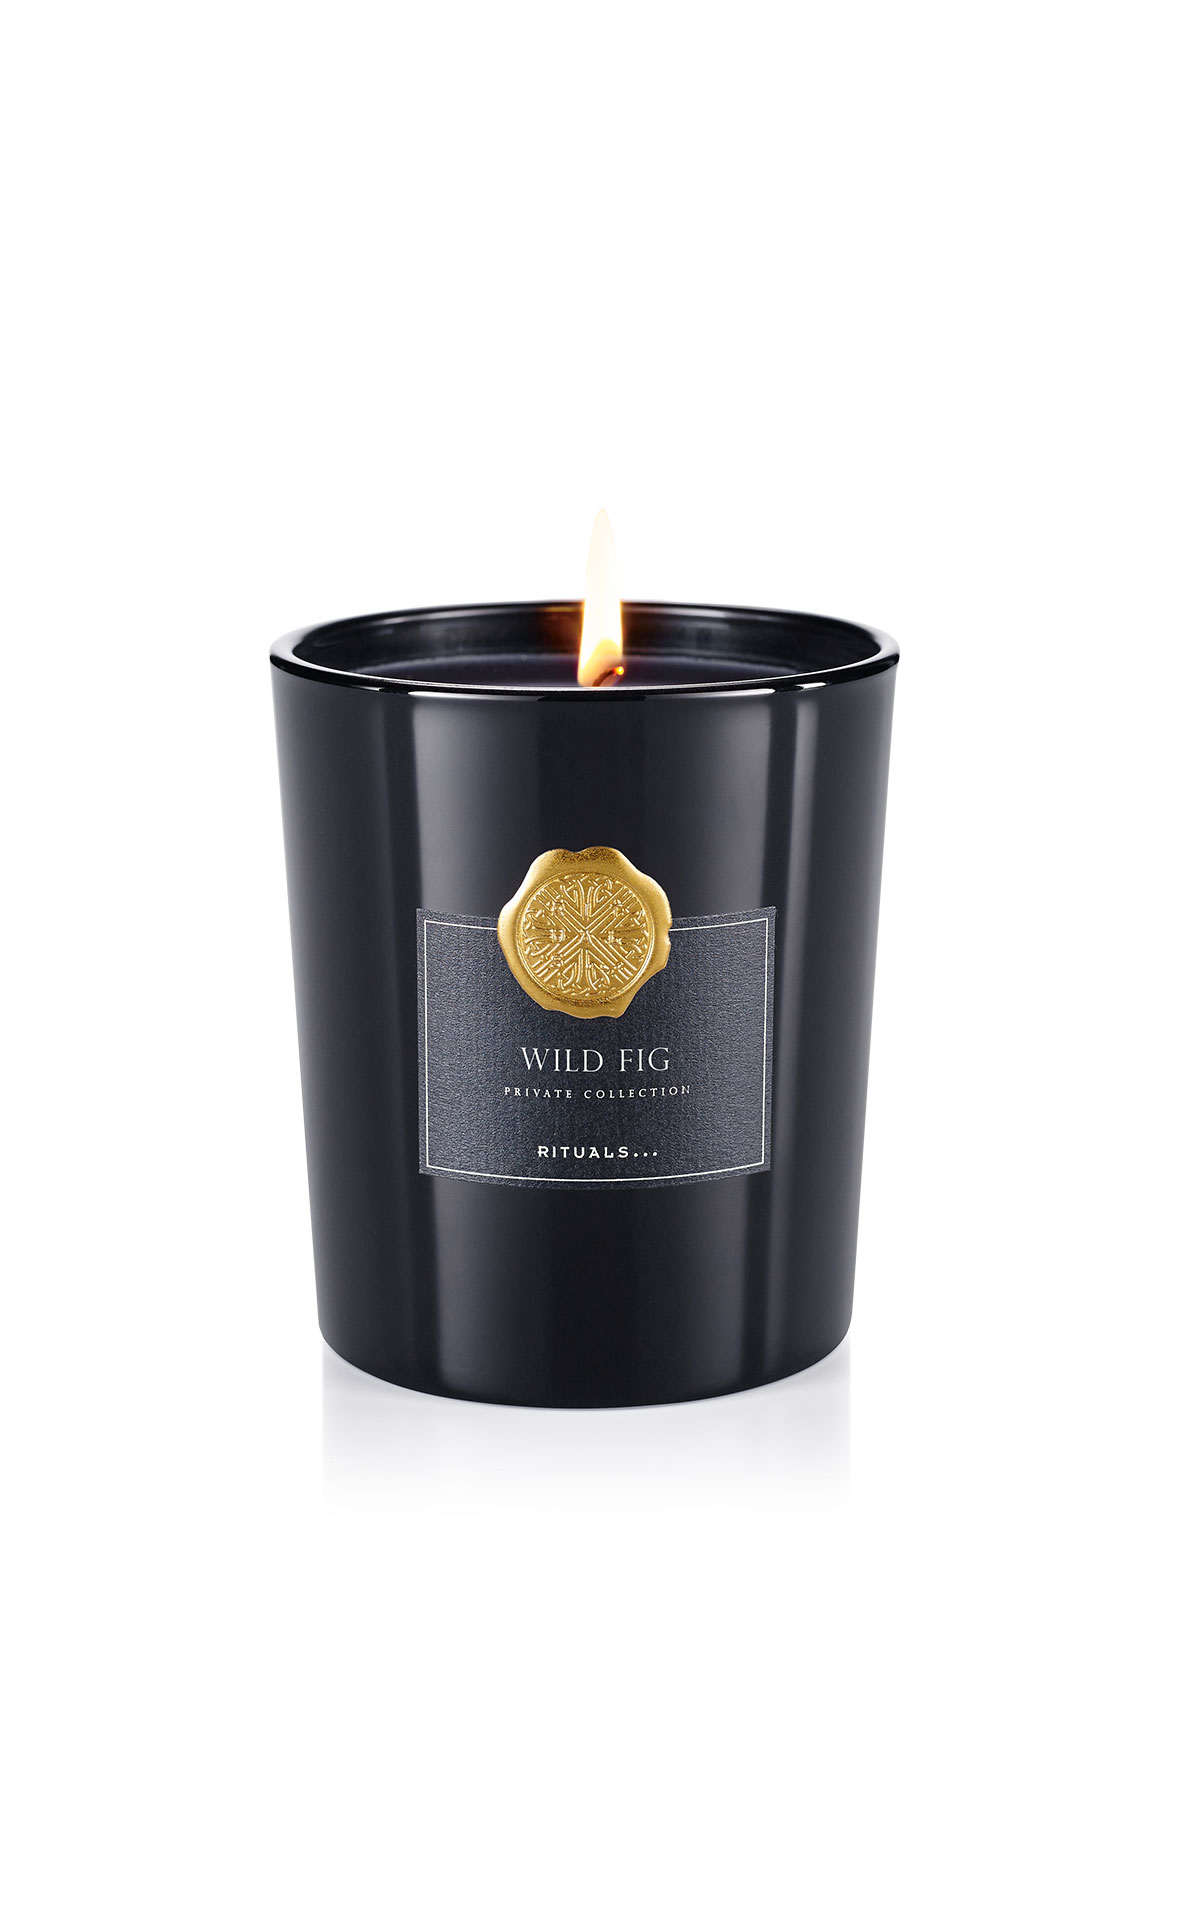 Rituals Private collection - wild fig scented candle from Kildare Village